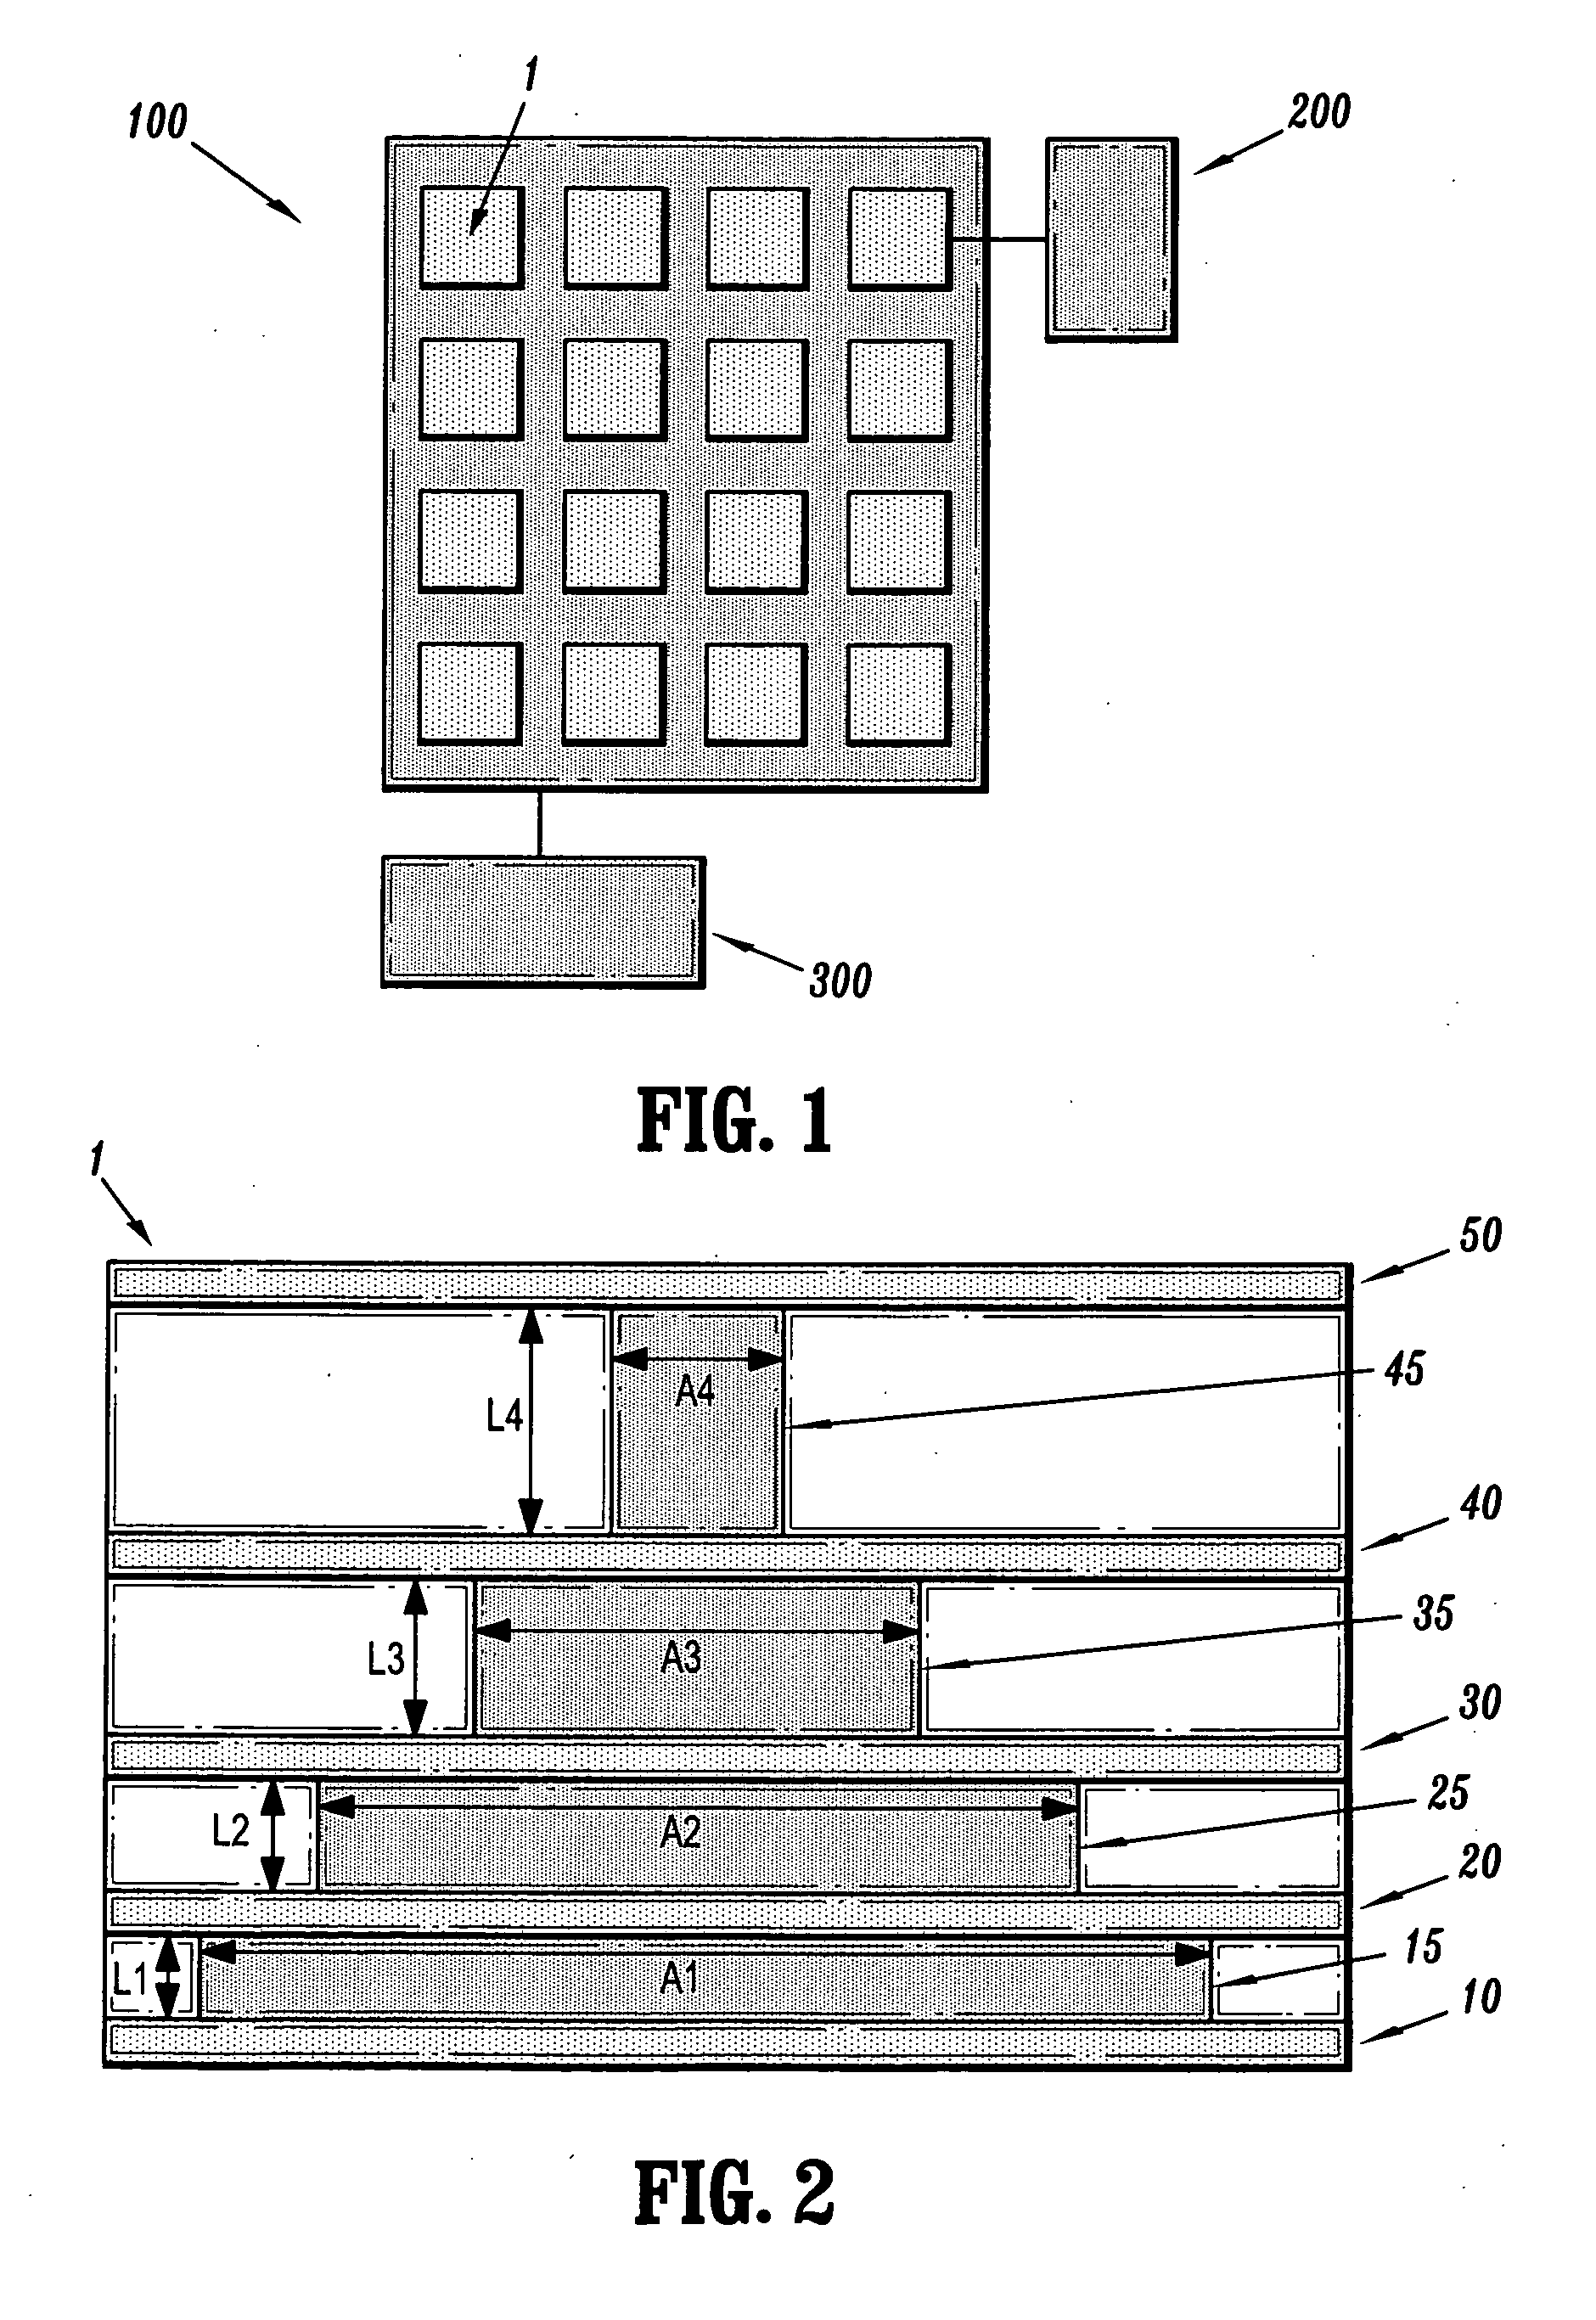 Multi-bit phase change memory cell and multi-bit phase change memory including the same, method of forming a multi-bit phase change memory, and method of programming a multi-bit phase change memory